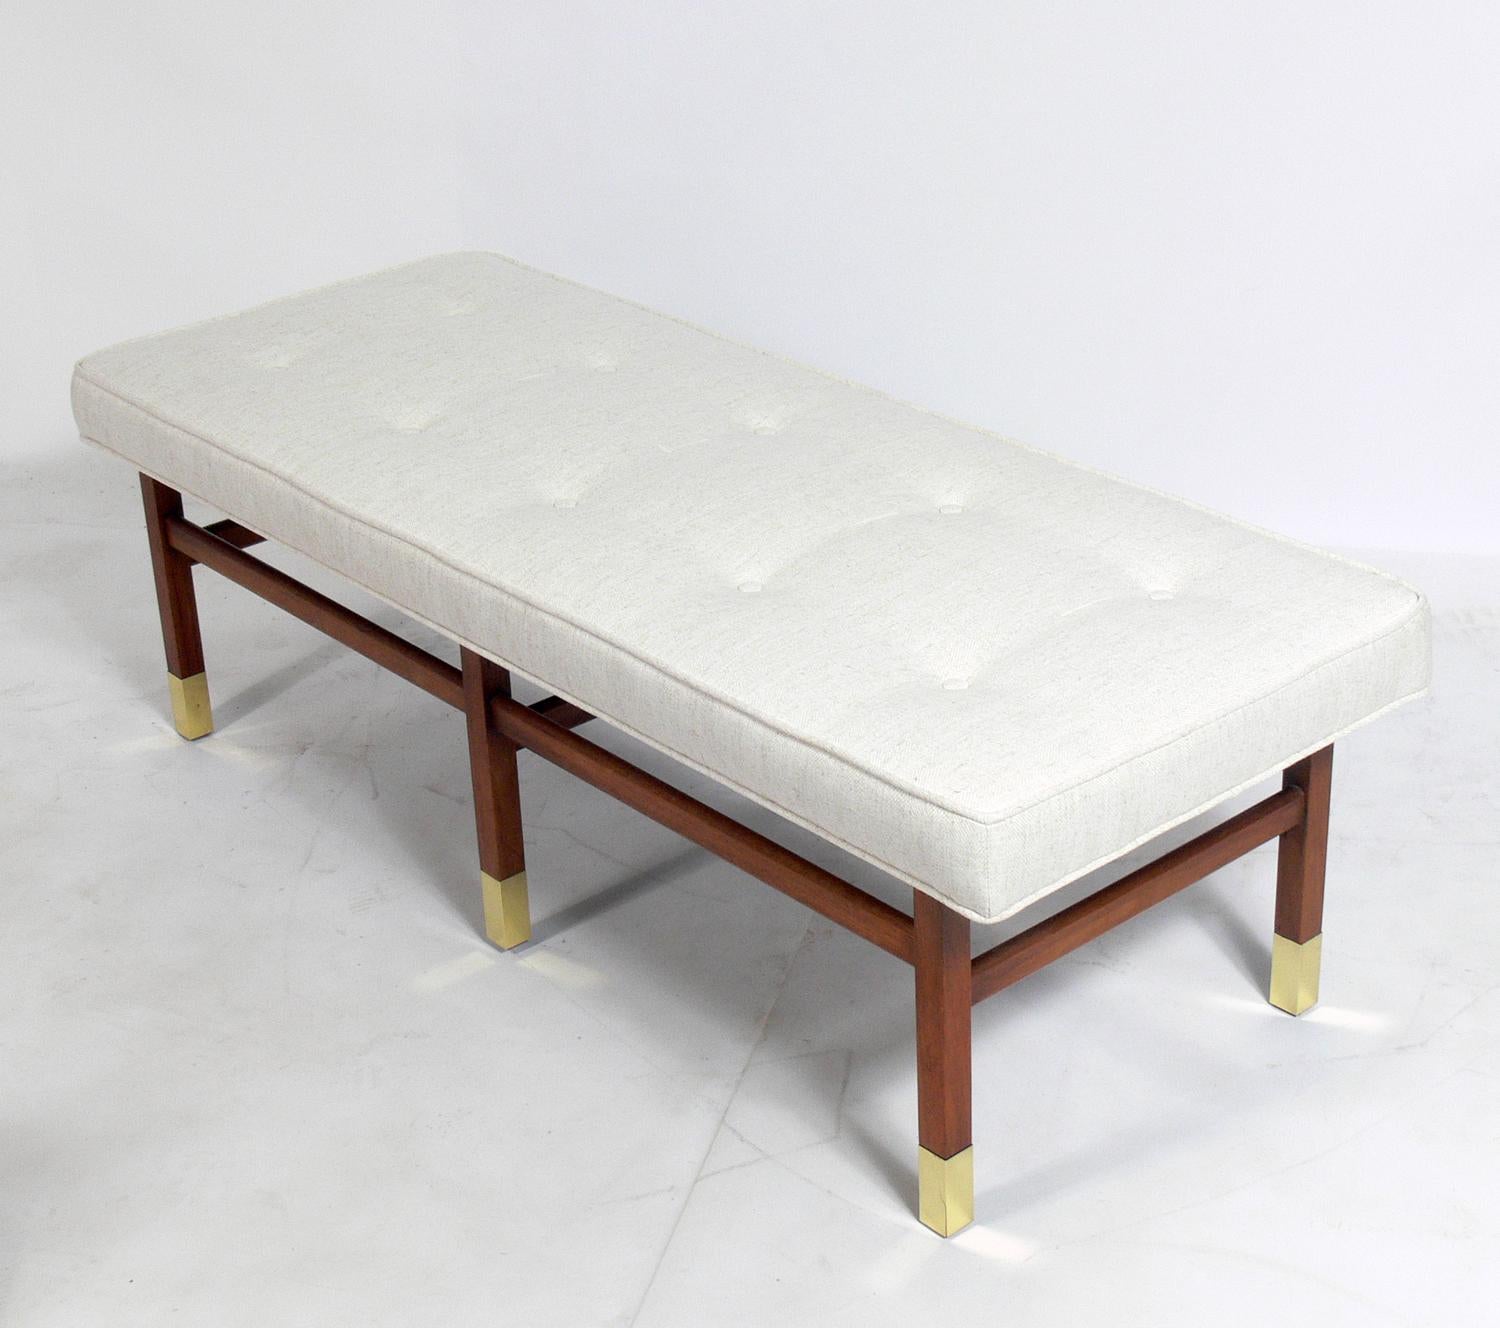 Mid-Century Modern bench attributed to Harvey Probber, American, circa 1960s. It has been reupholstered in an ivory color herringbone fabric. Brass feet have been hand polished and lacquered. Walnut has been cleaned and oiled.